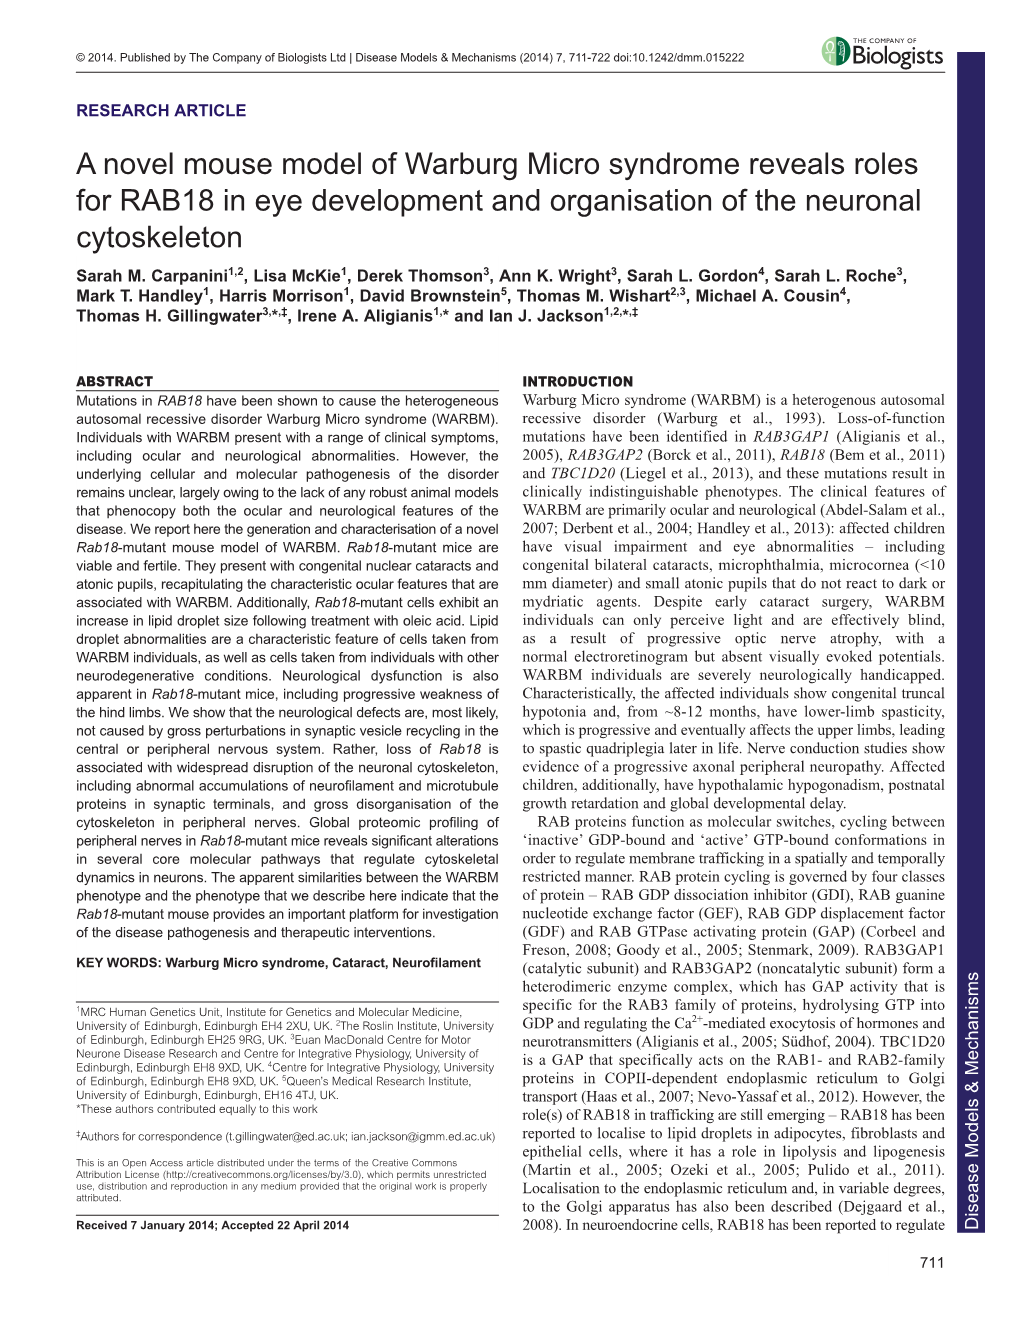 A Novel Mouse Model of Warburg Micro Syndrome Reveals Roles for RAB18 in Eye Development and Organisation of the Neuronal Cytoskeleton Sarah M